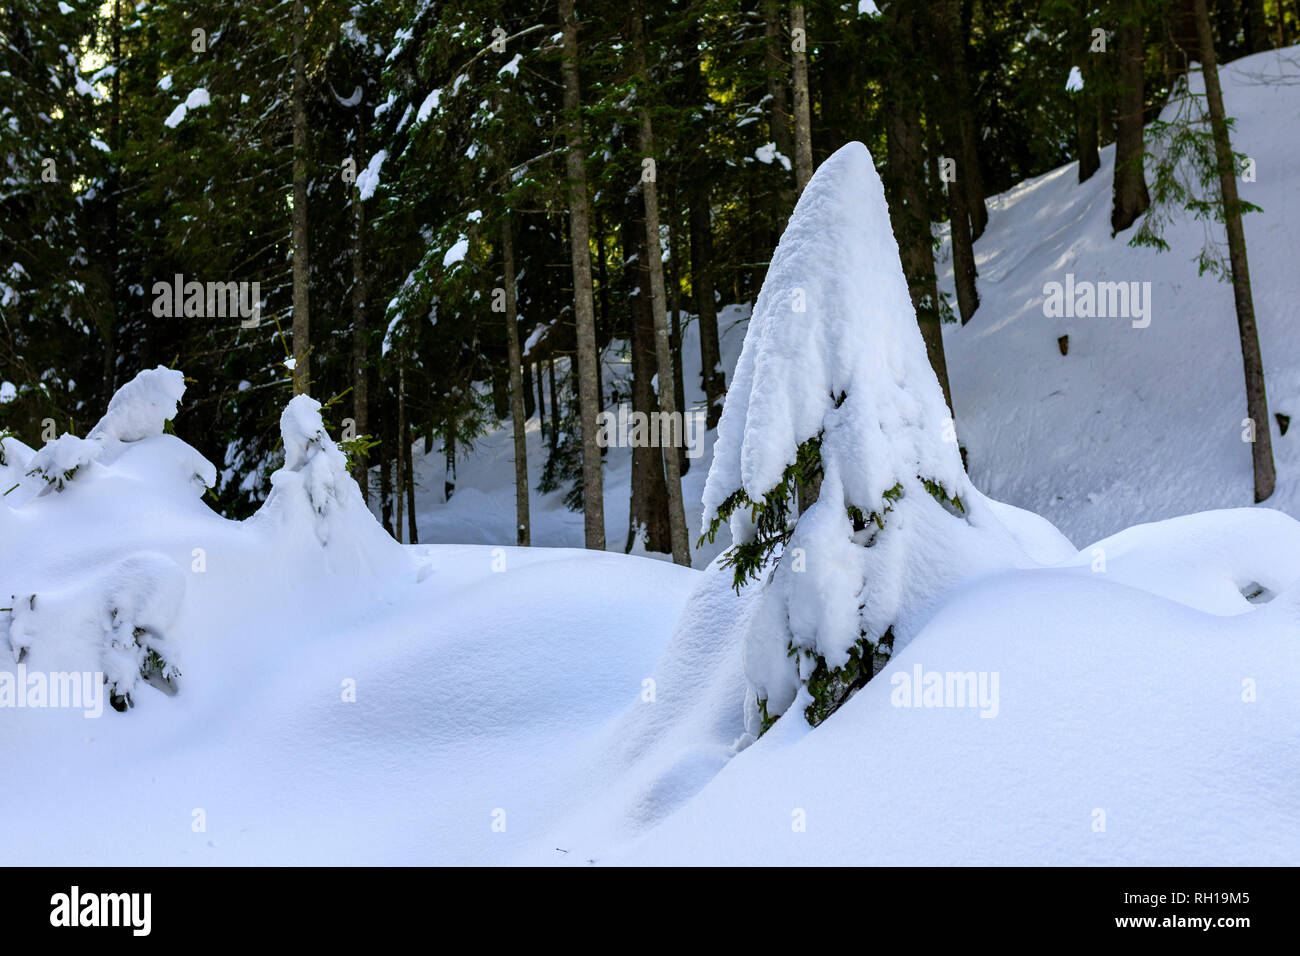 A Young Fir Tree Covered With Lot of Snow in the Forest Stock Photo